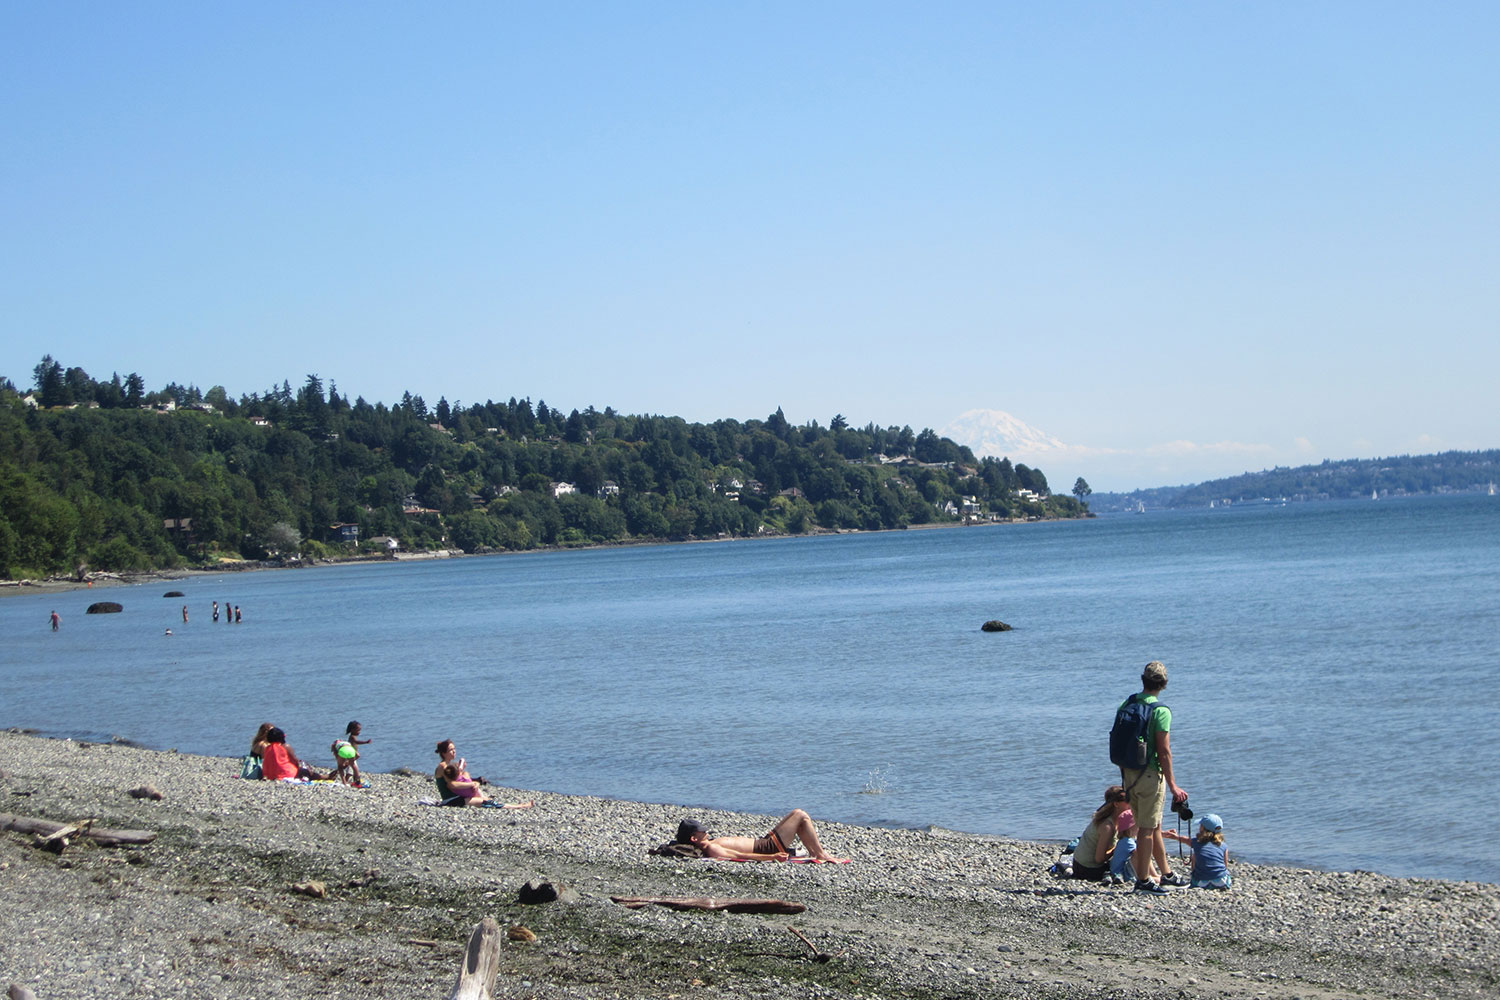 Discovery Park is a top Seattle attraction, especially for those with active lifestyles.